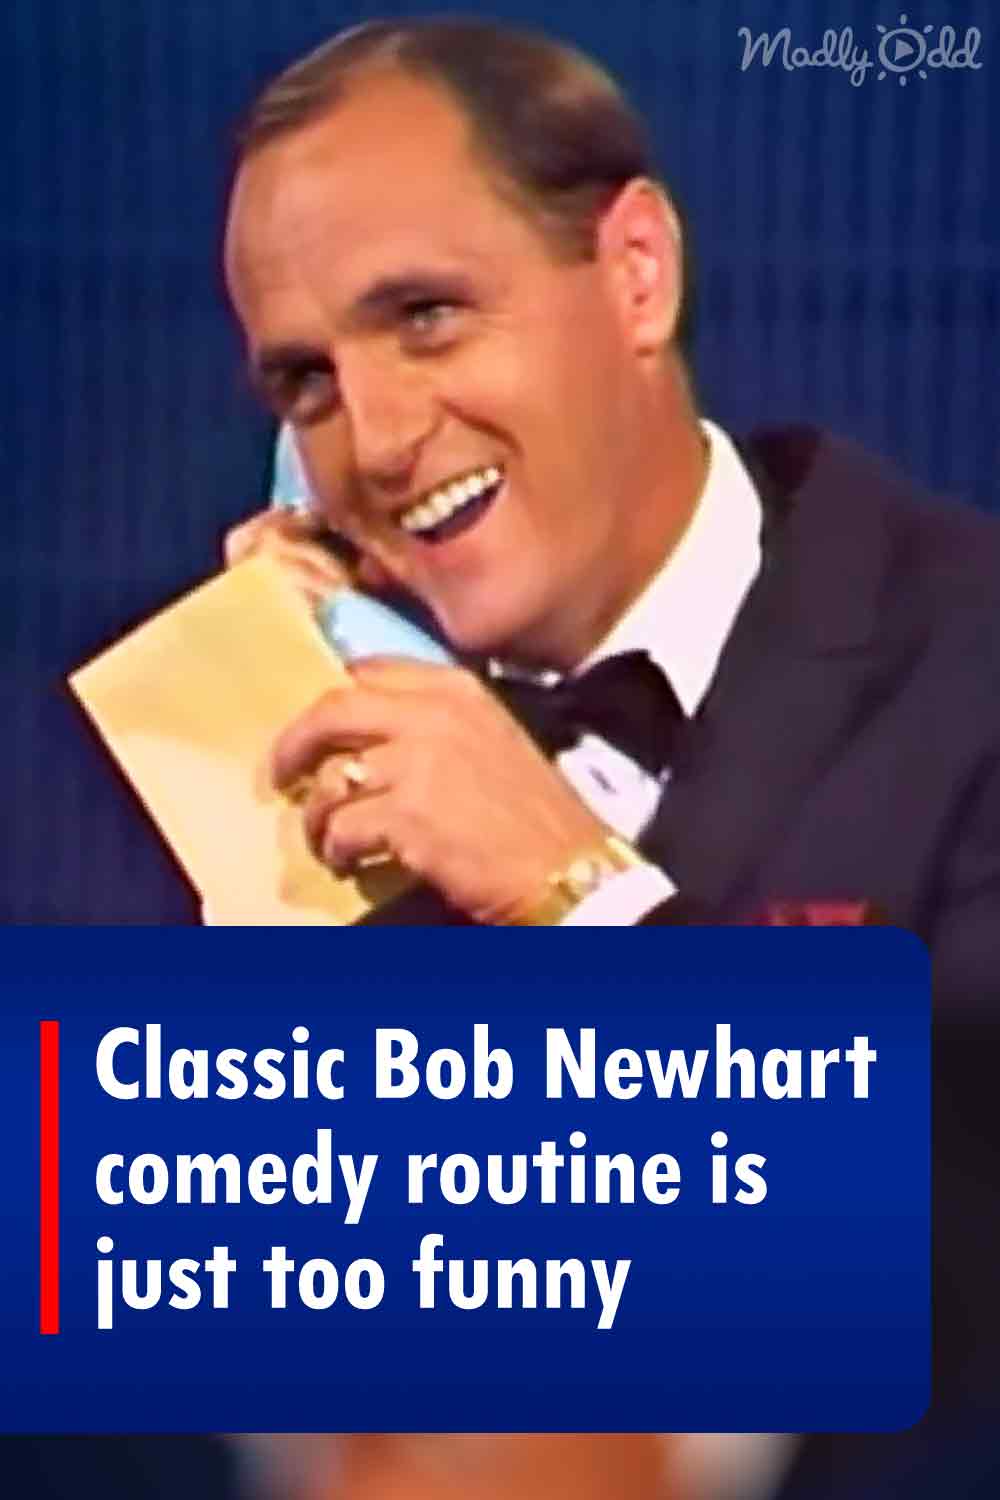 Classic Bob Newhart comedy routine is just too funny